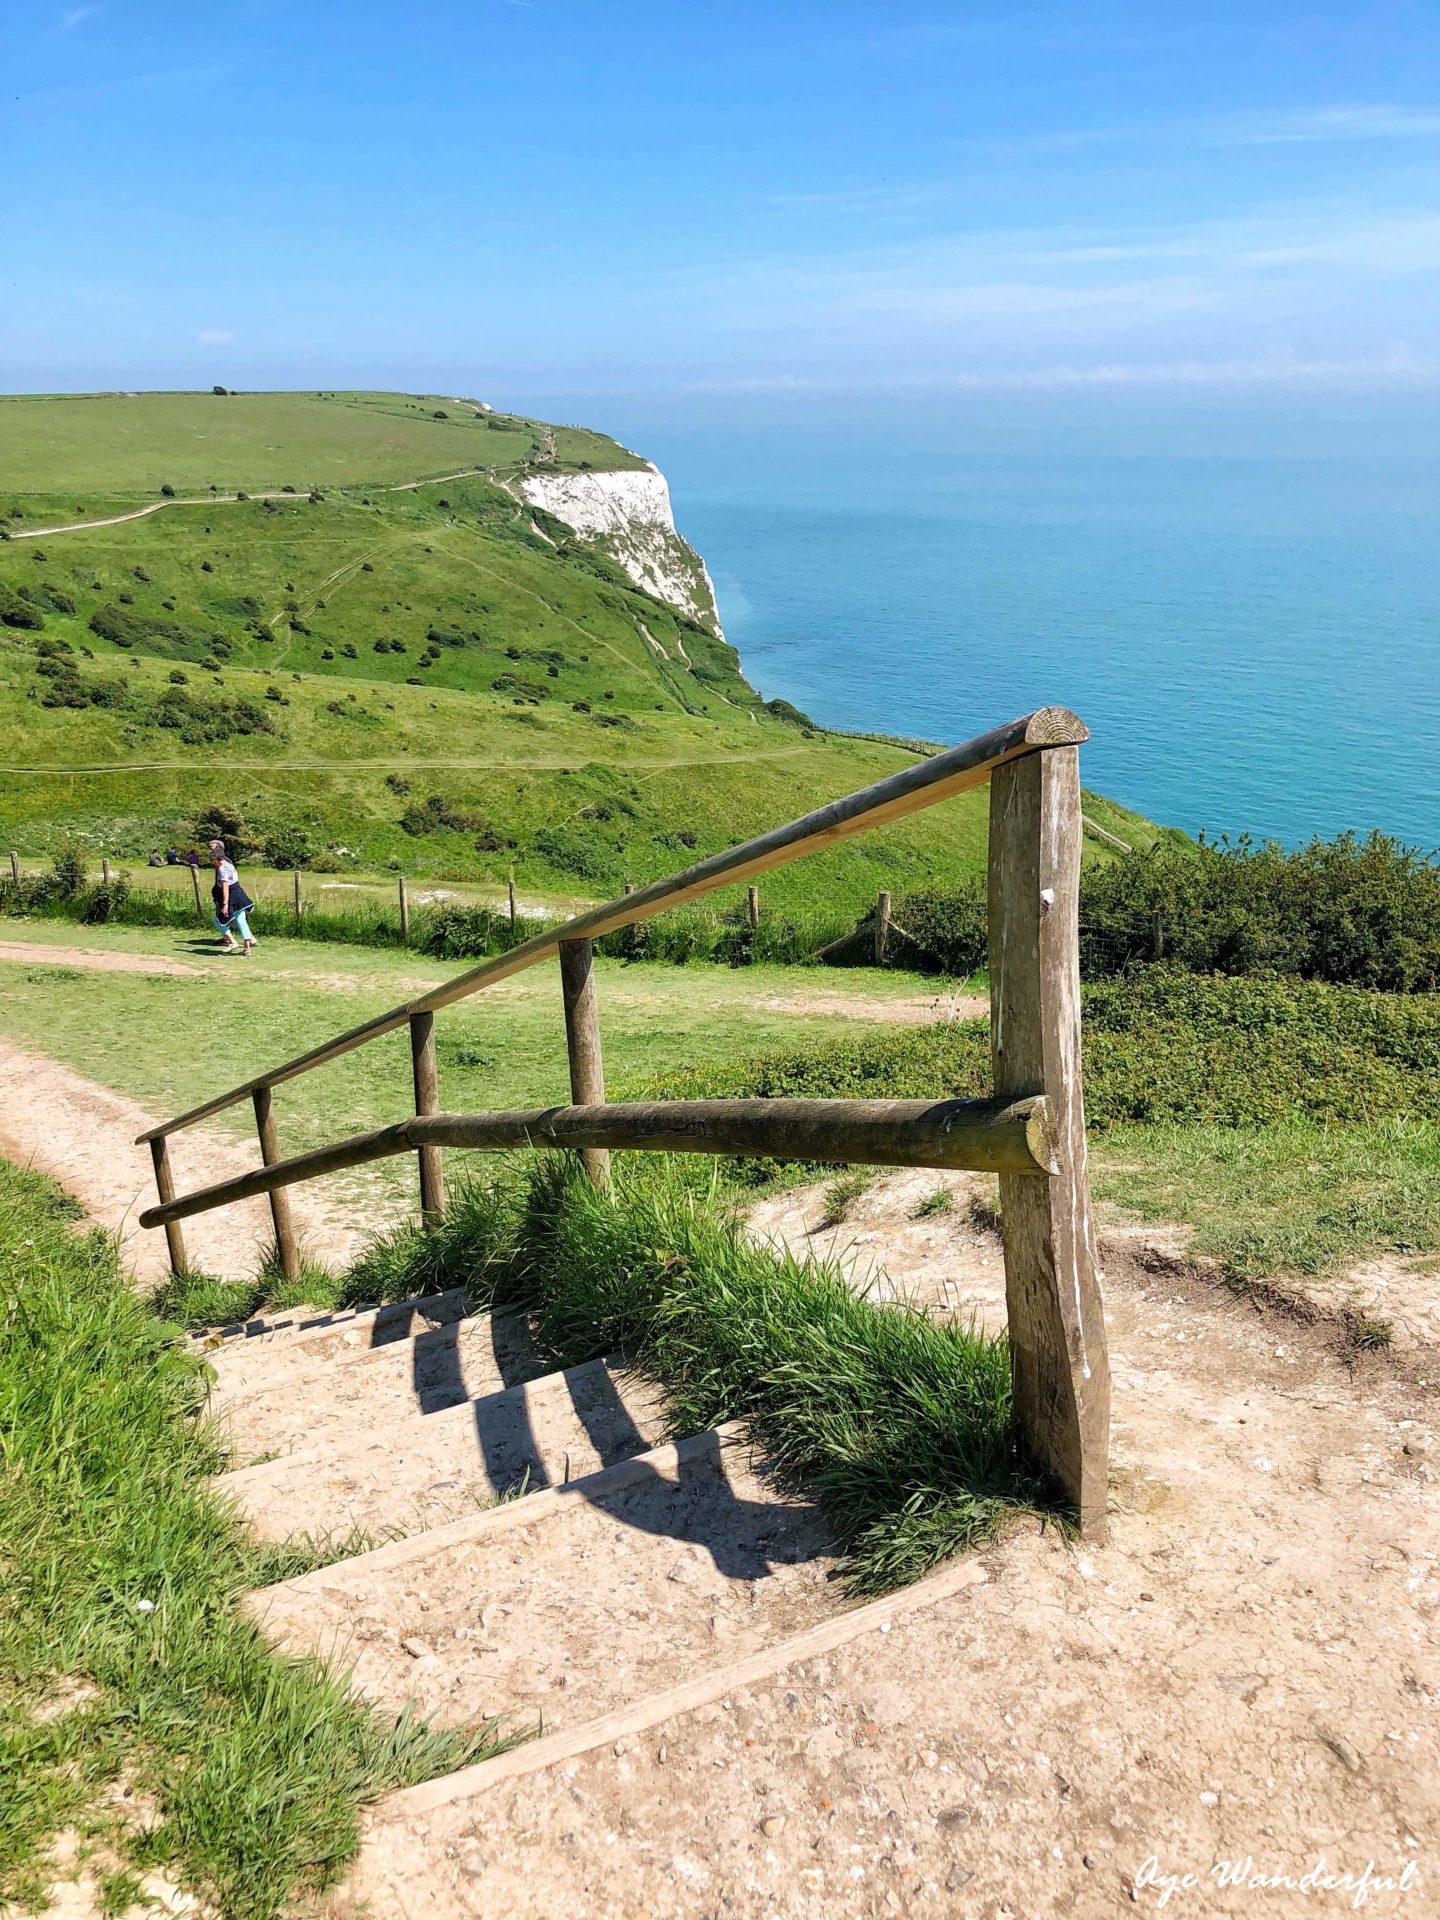 White Cliffs of Dover Walking Trail